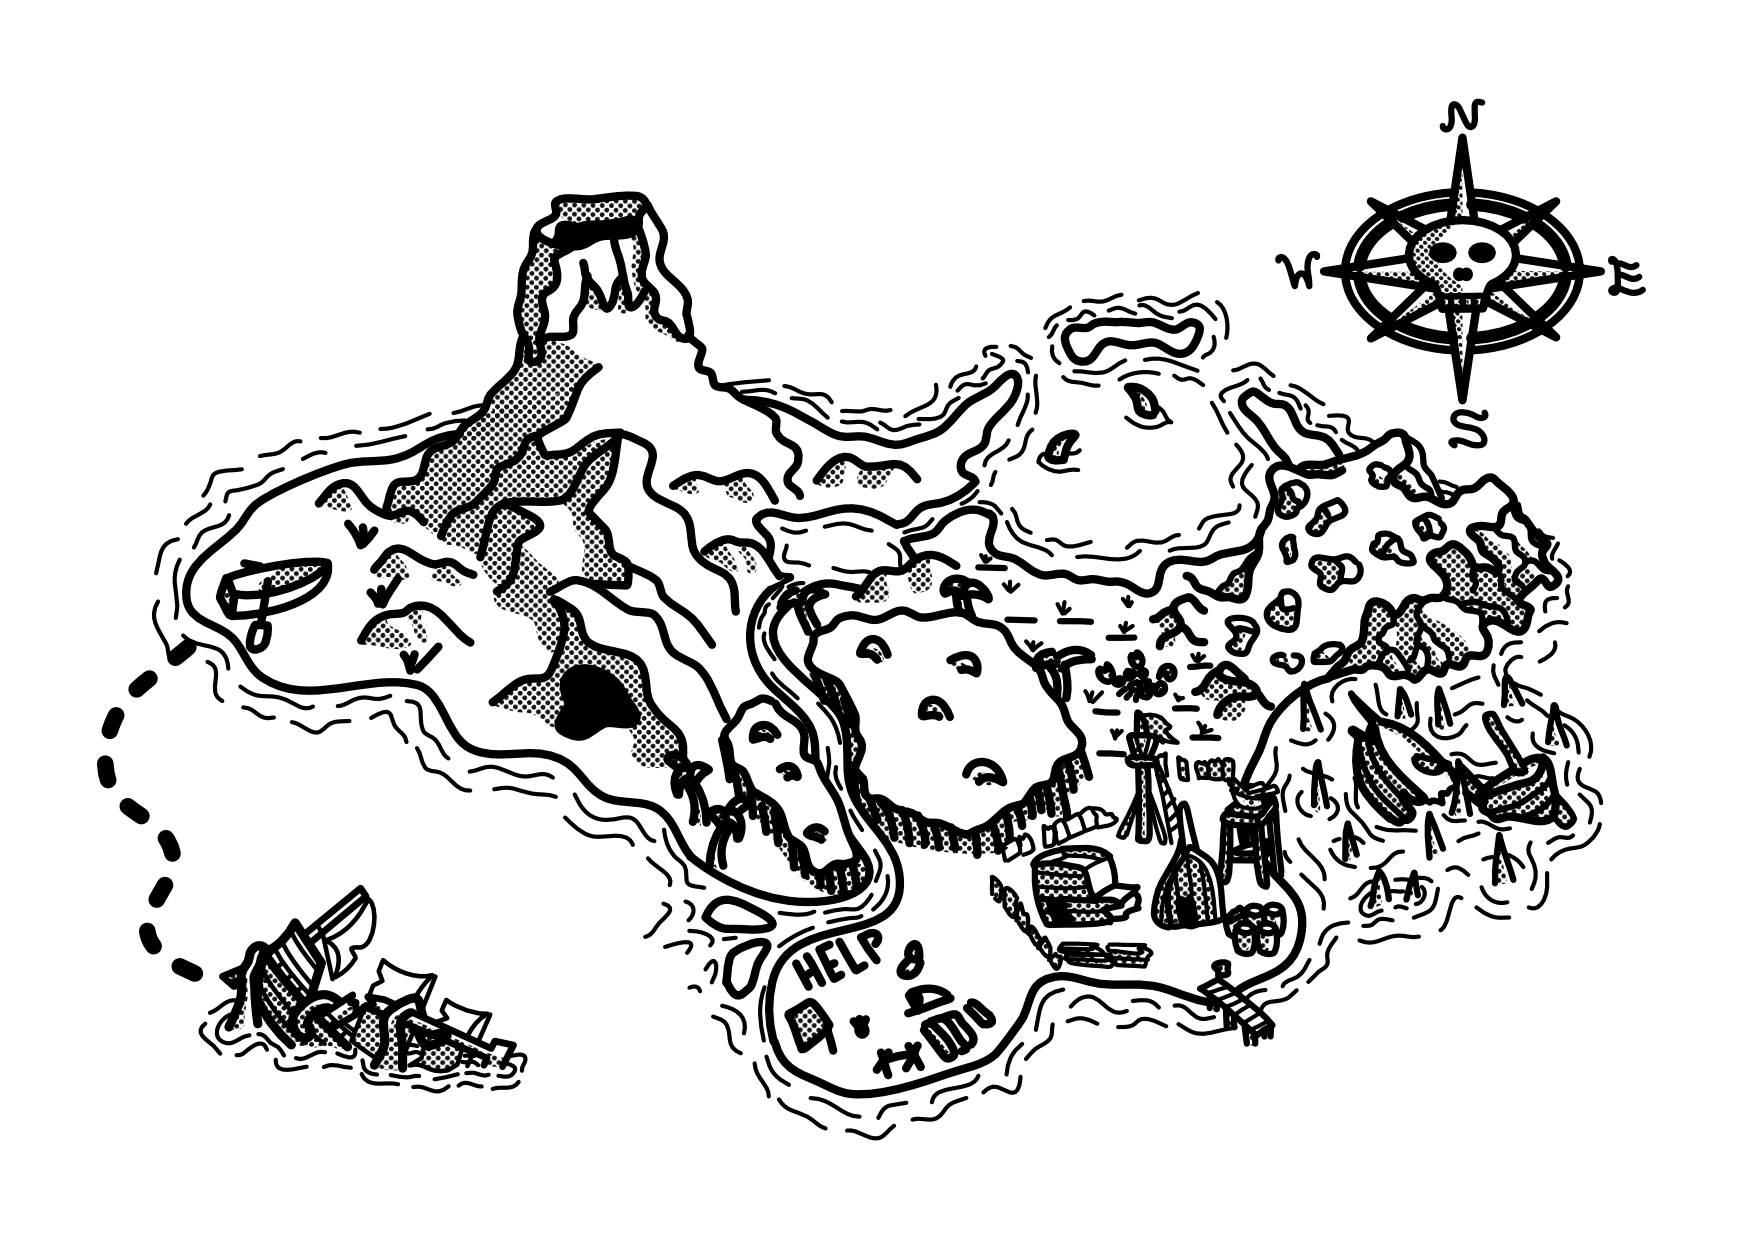 An isometric map of a pirate themed island - featuring a volcano, a shark infested lagoon, and a shipwreck amongst other locations.